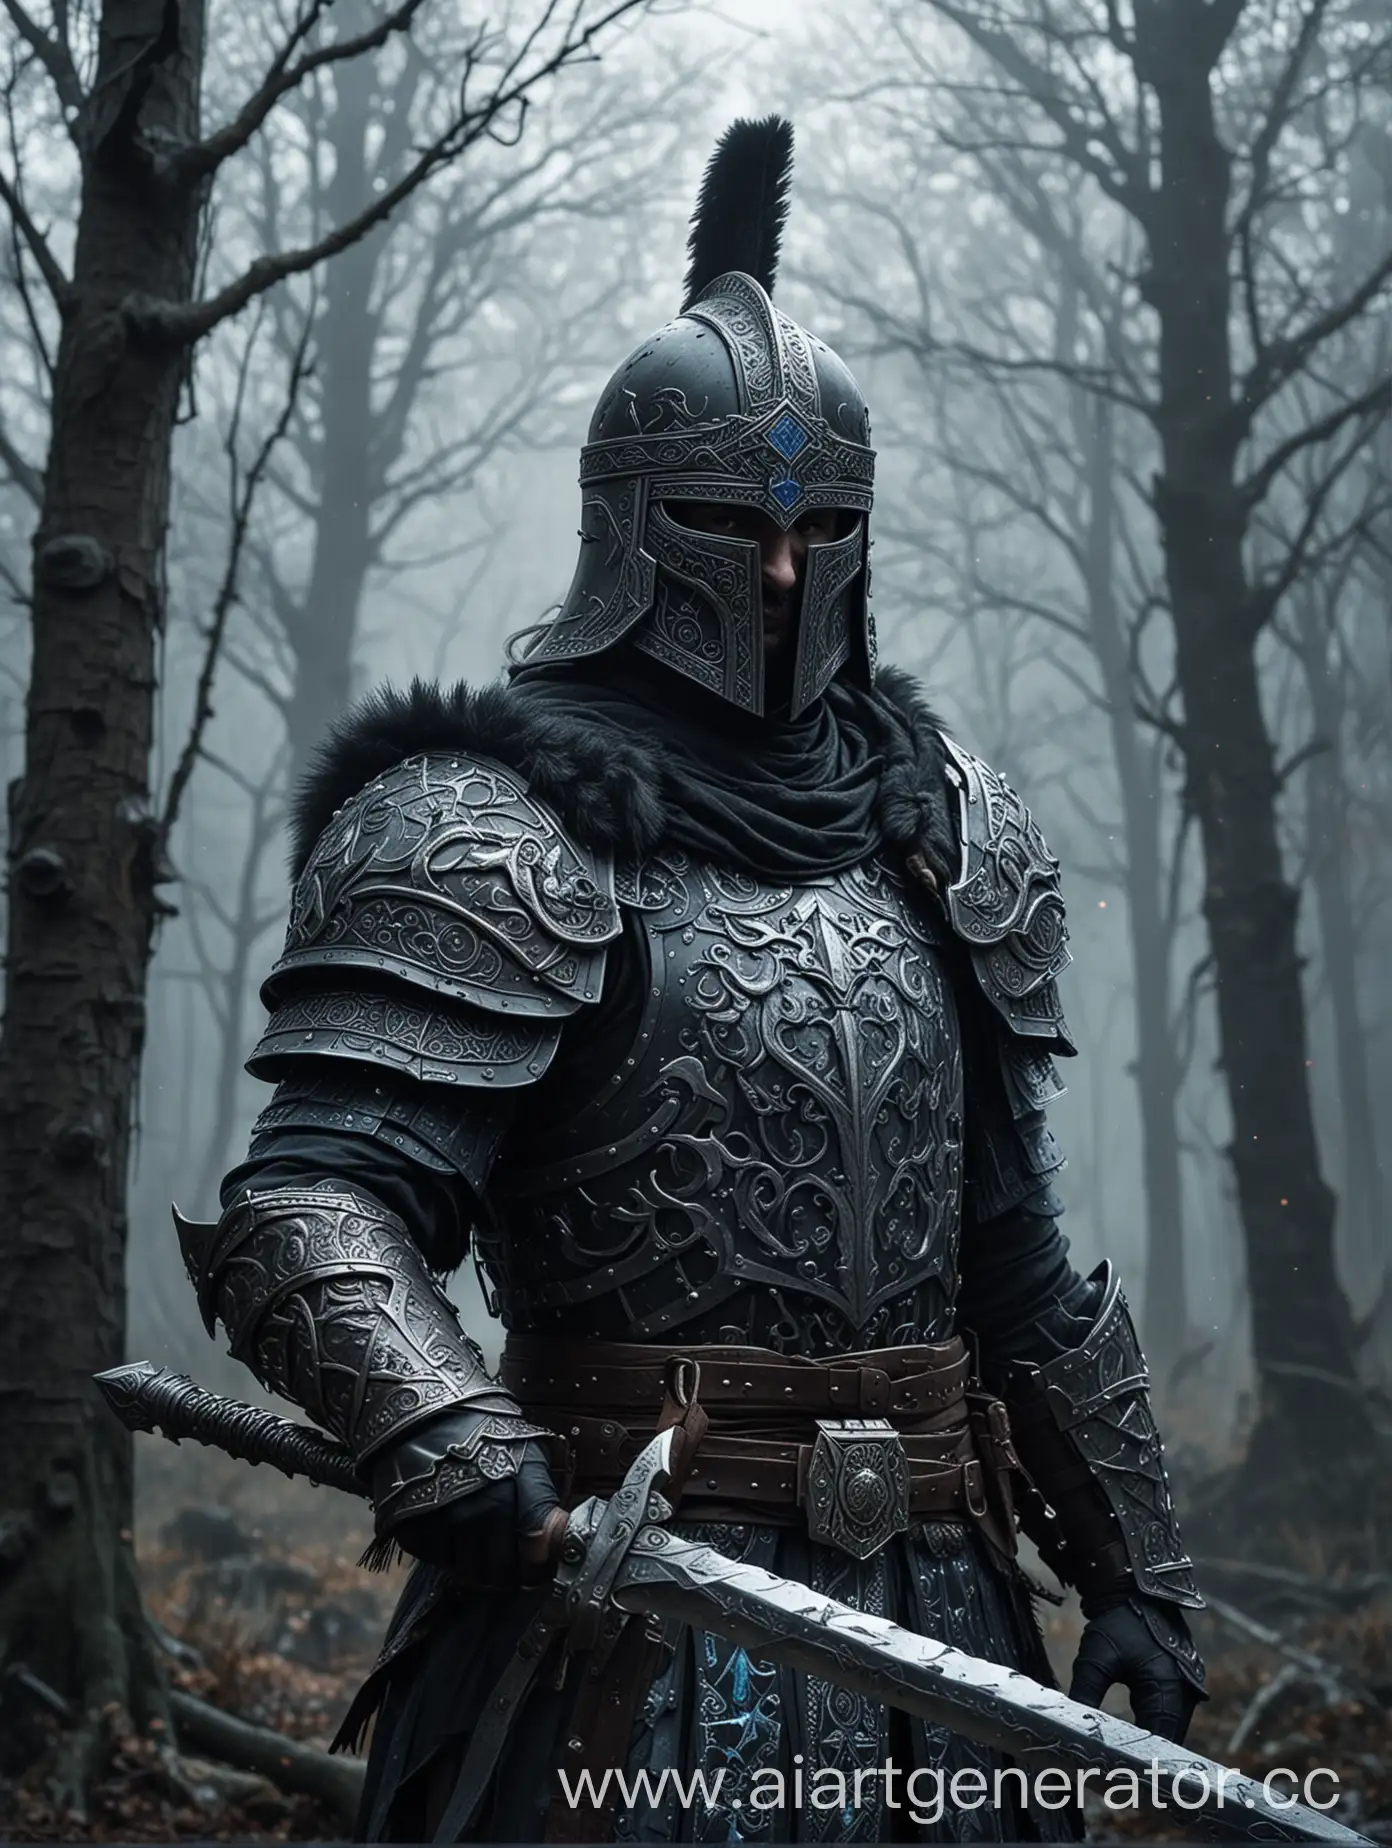 Dark-Slavic-Knight-Thulerik-with-Magical-Sword-and-Shield-in-Misty-Forest